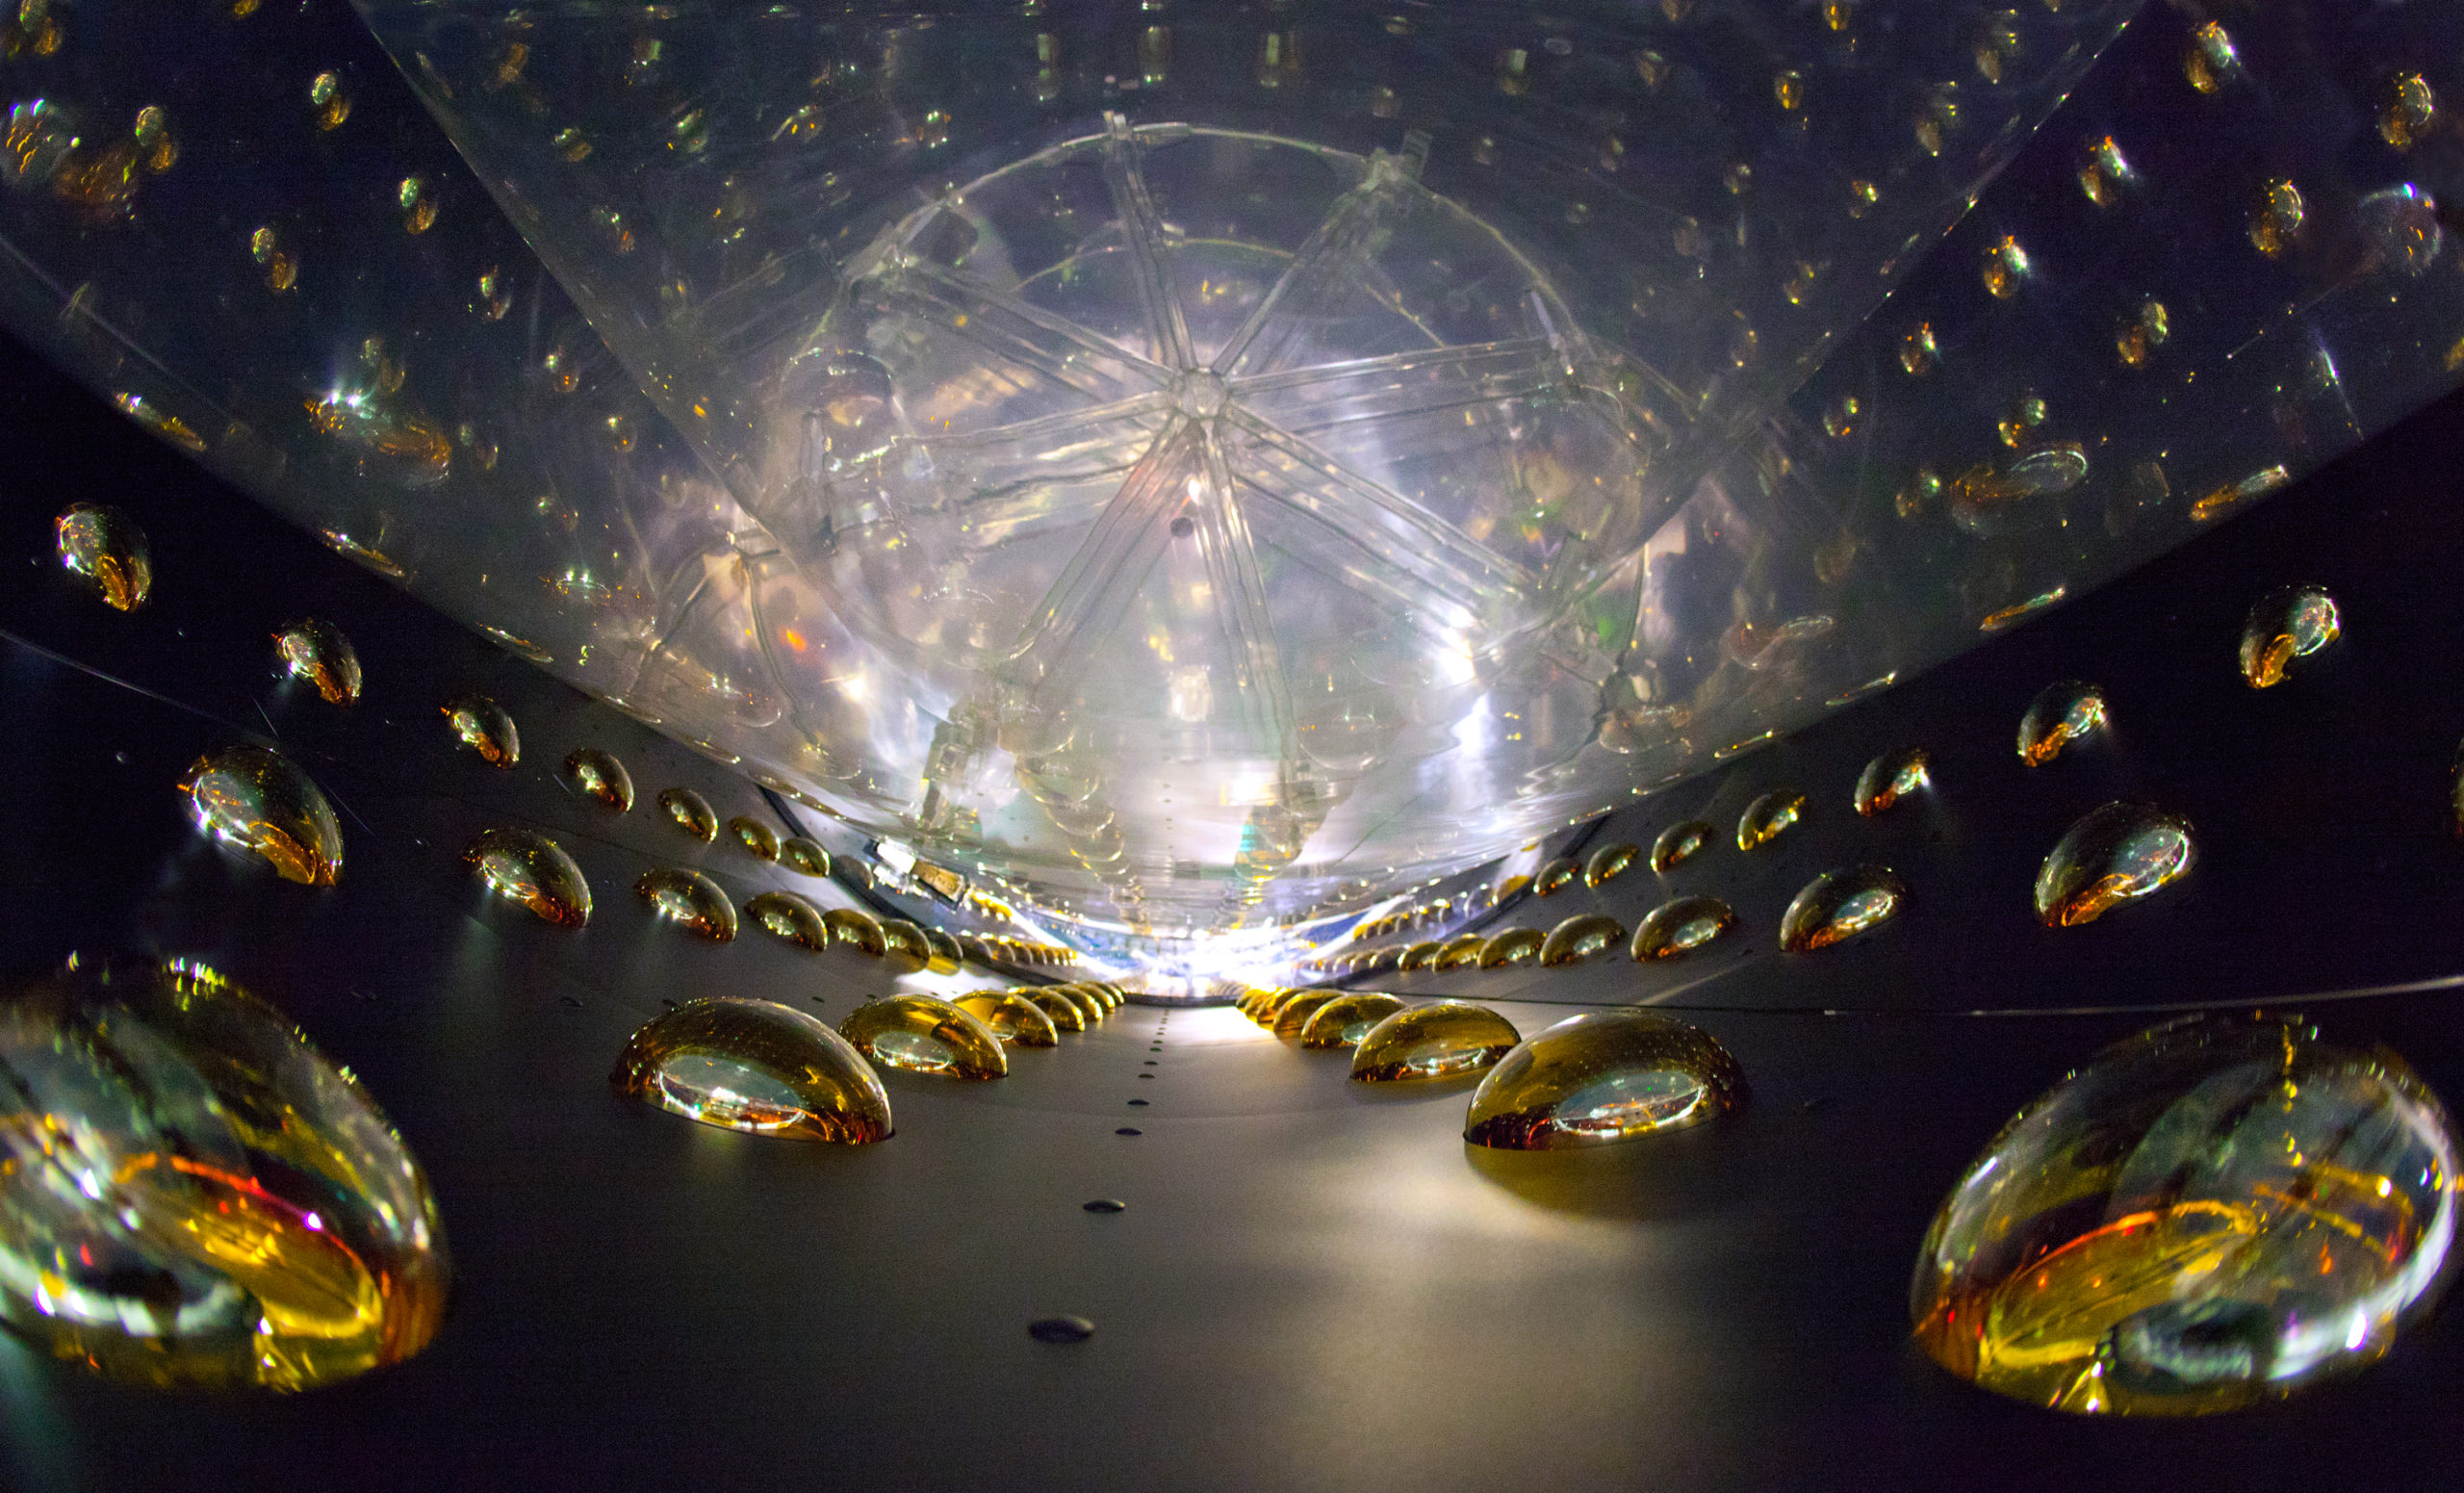 New Analysis At Nuclear Reactor Reignites Search For Mysterious ‘Sterile’ Neutrino